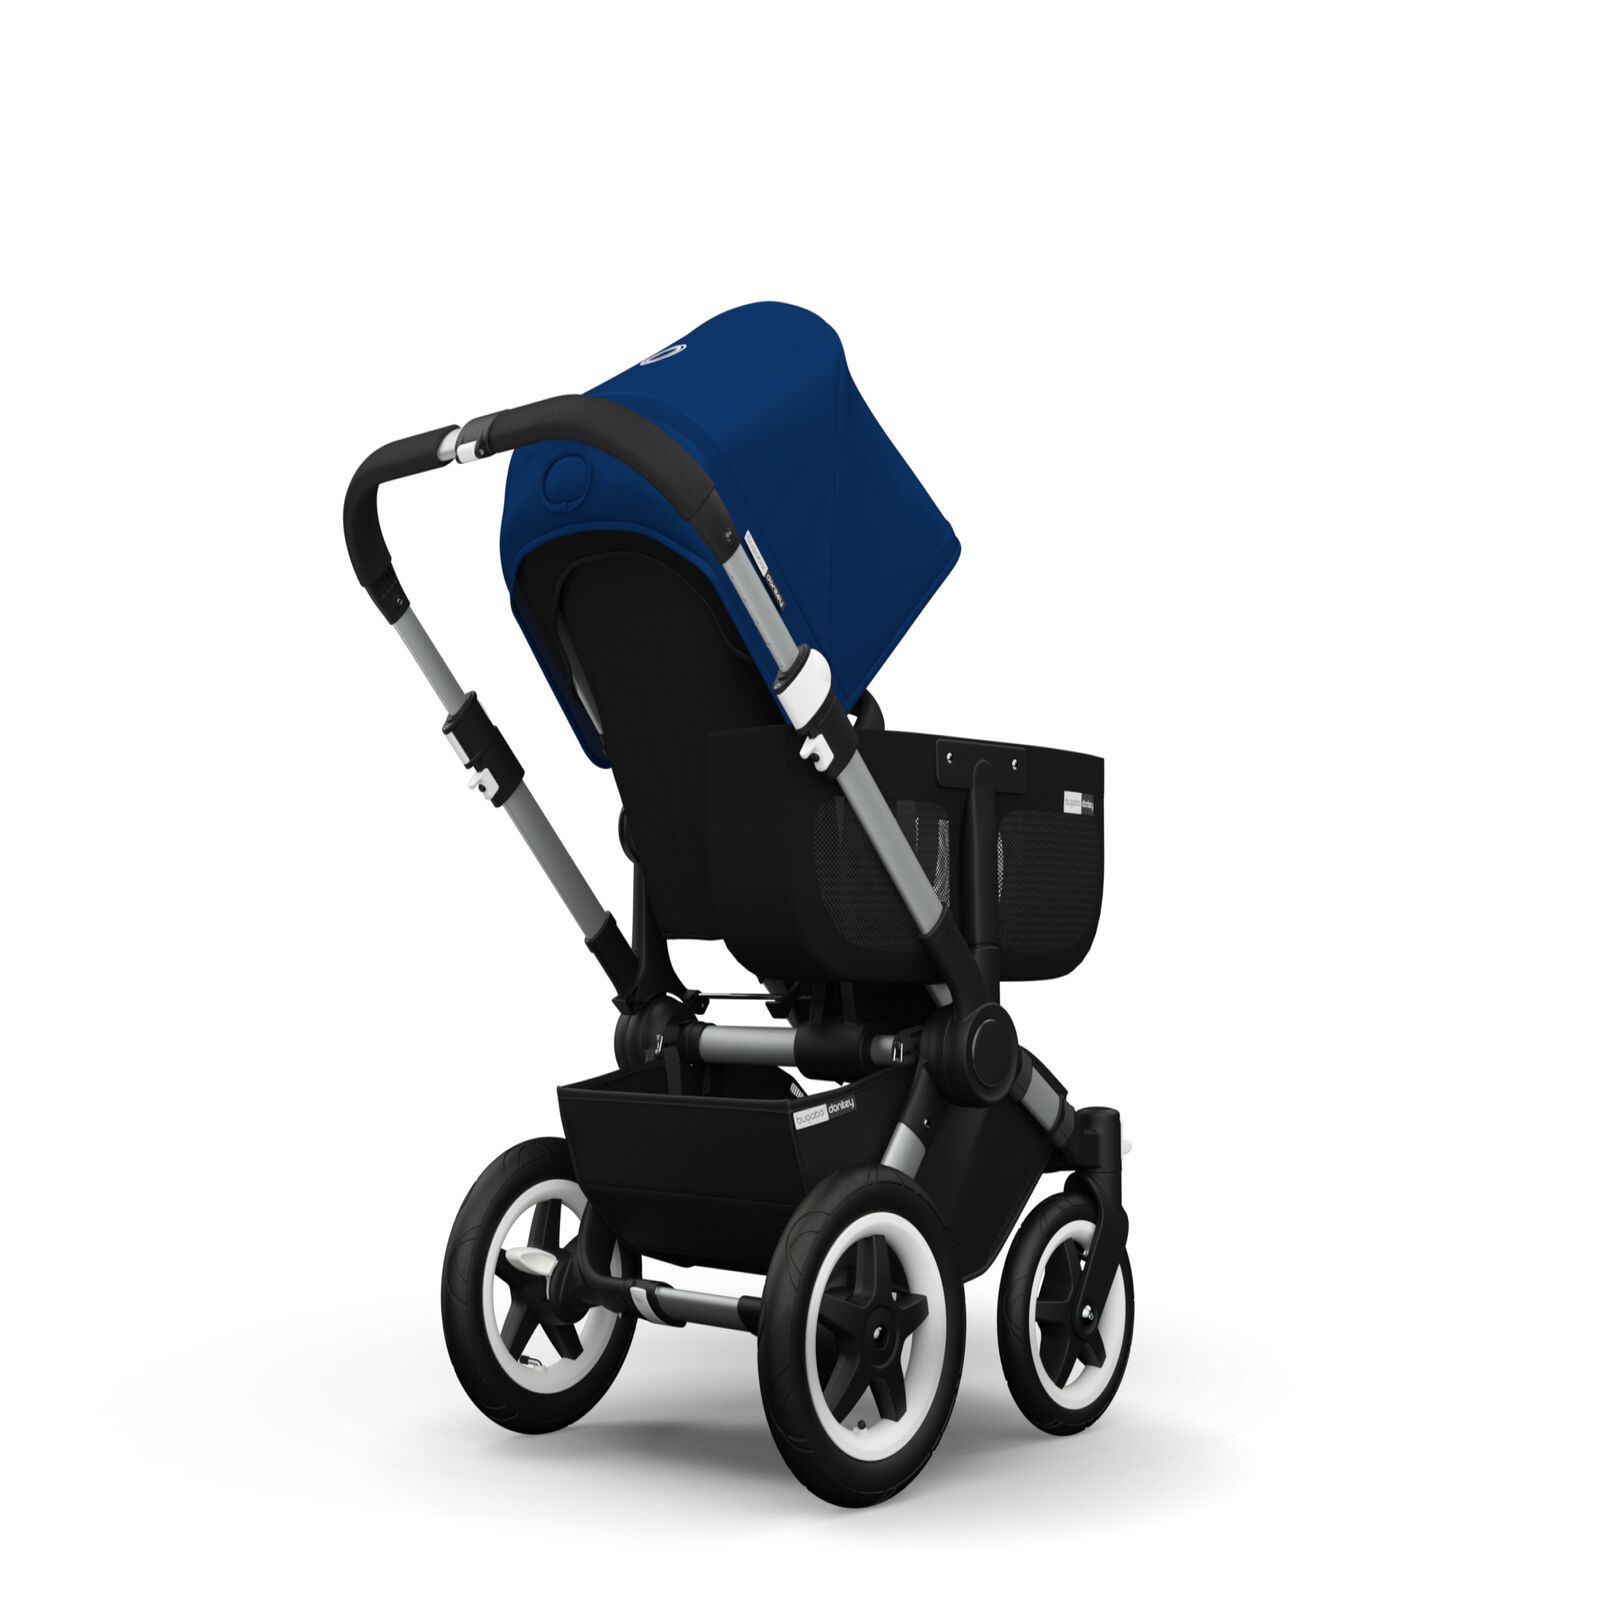 Bugaboo Donkey sun canopy (non-extendable) - View 4